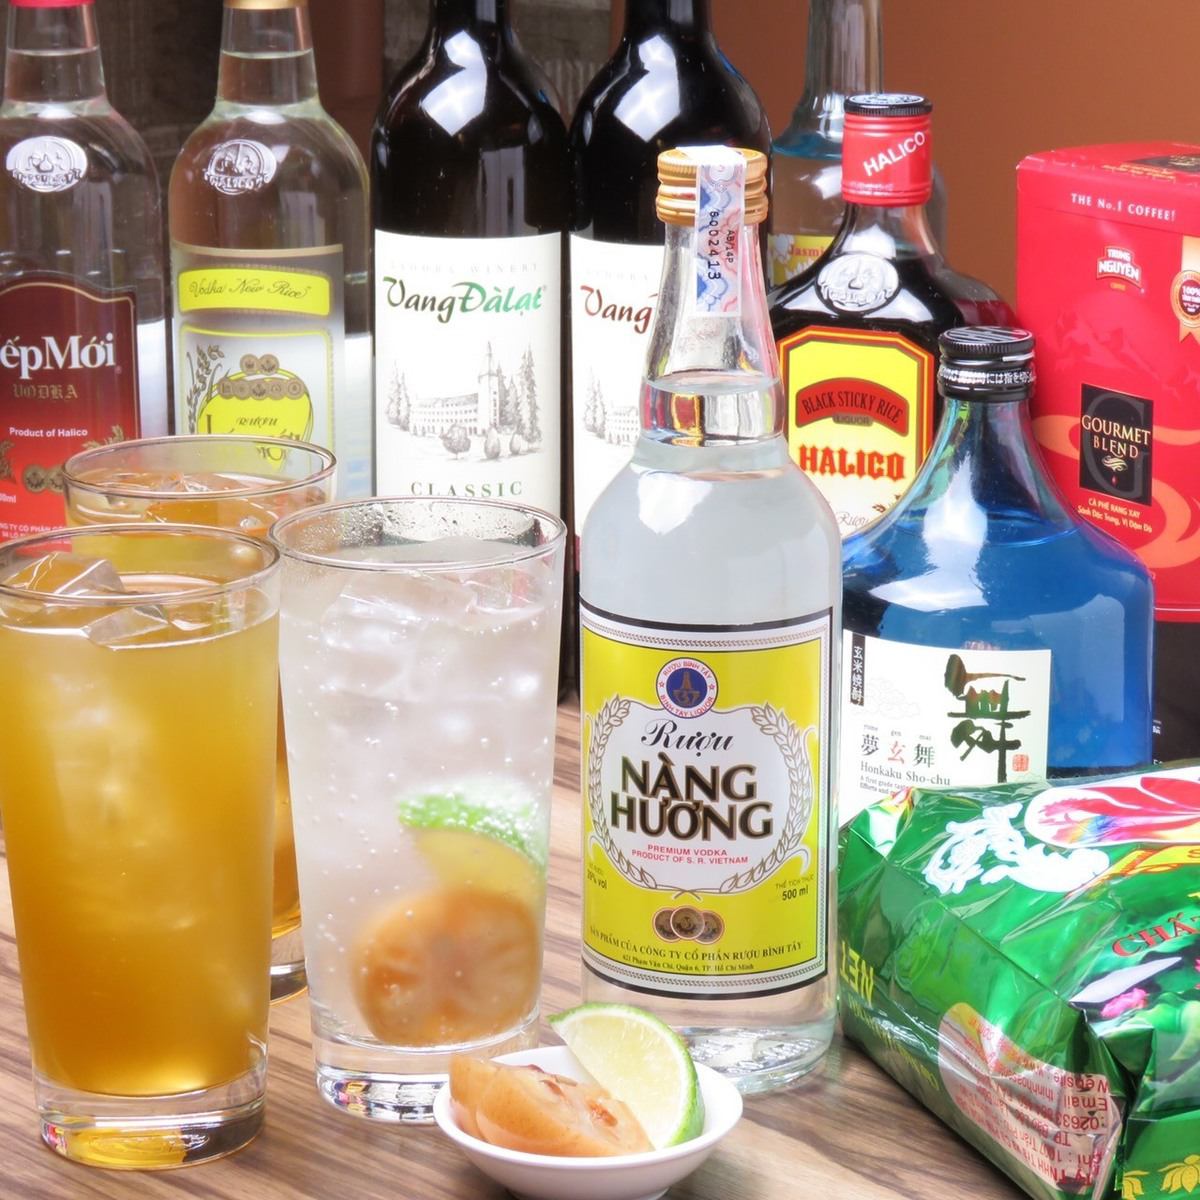 There is also a wide variety of alcoholic beverages! Draft beer (Asahi Super Dry), Vietnamese beer, local Vietnamese sake, sour, whiskey, cocktails, plum wine, shochu, wine, etc. Come and enjoy a drinking party at a Vietnamese bar that will make you feel as if you were on a trip to Vietnam.